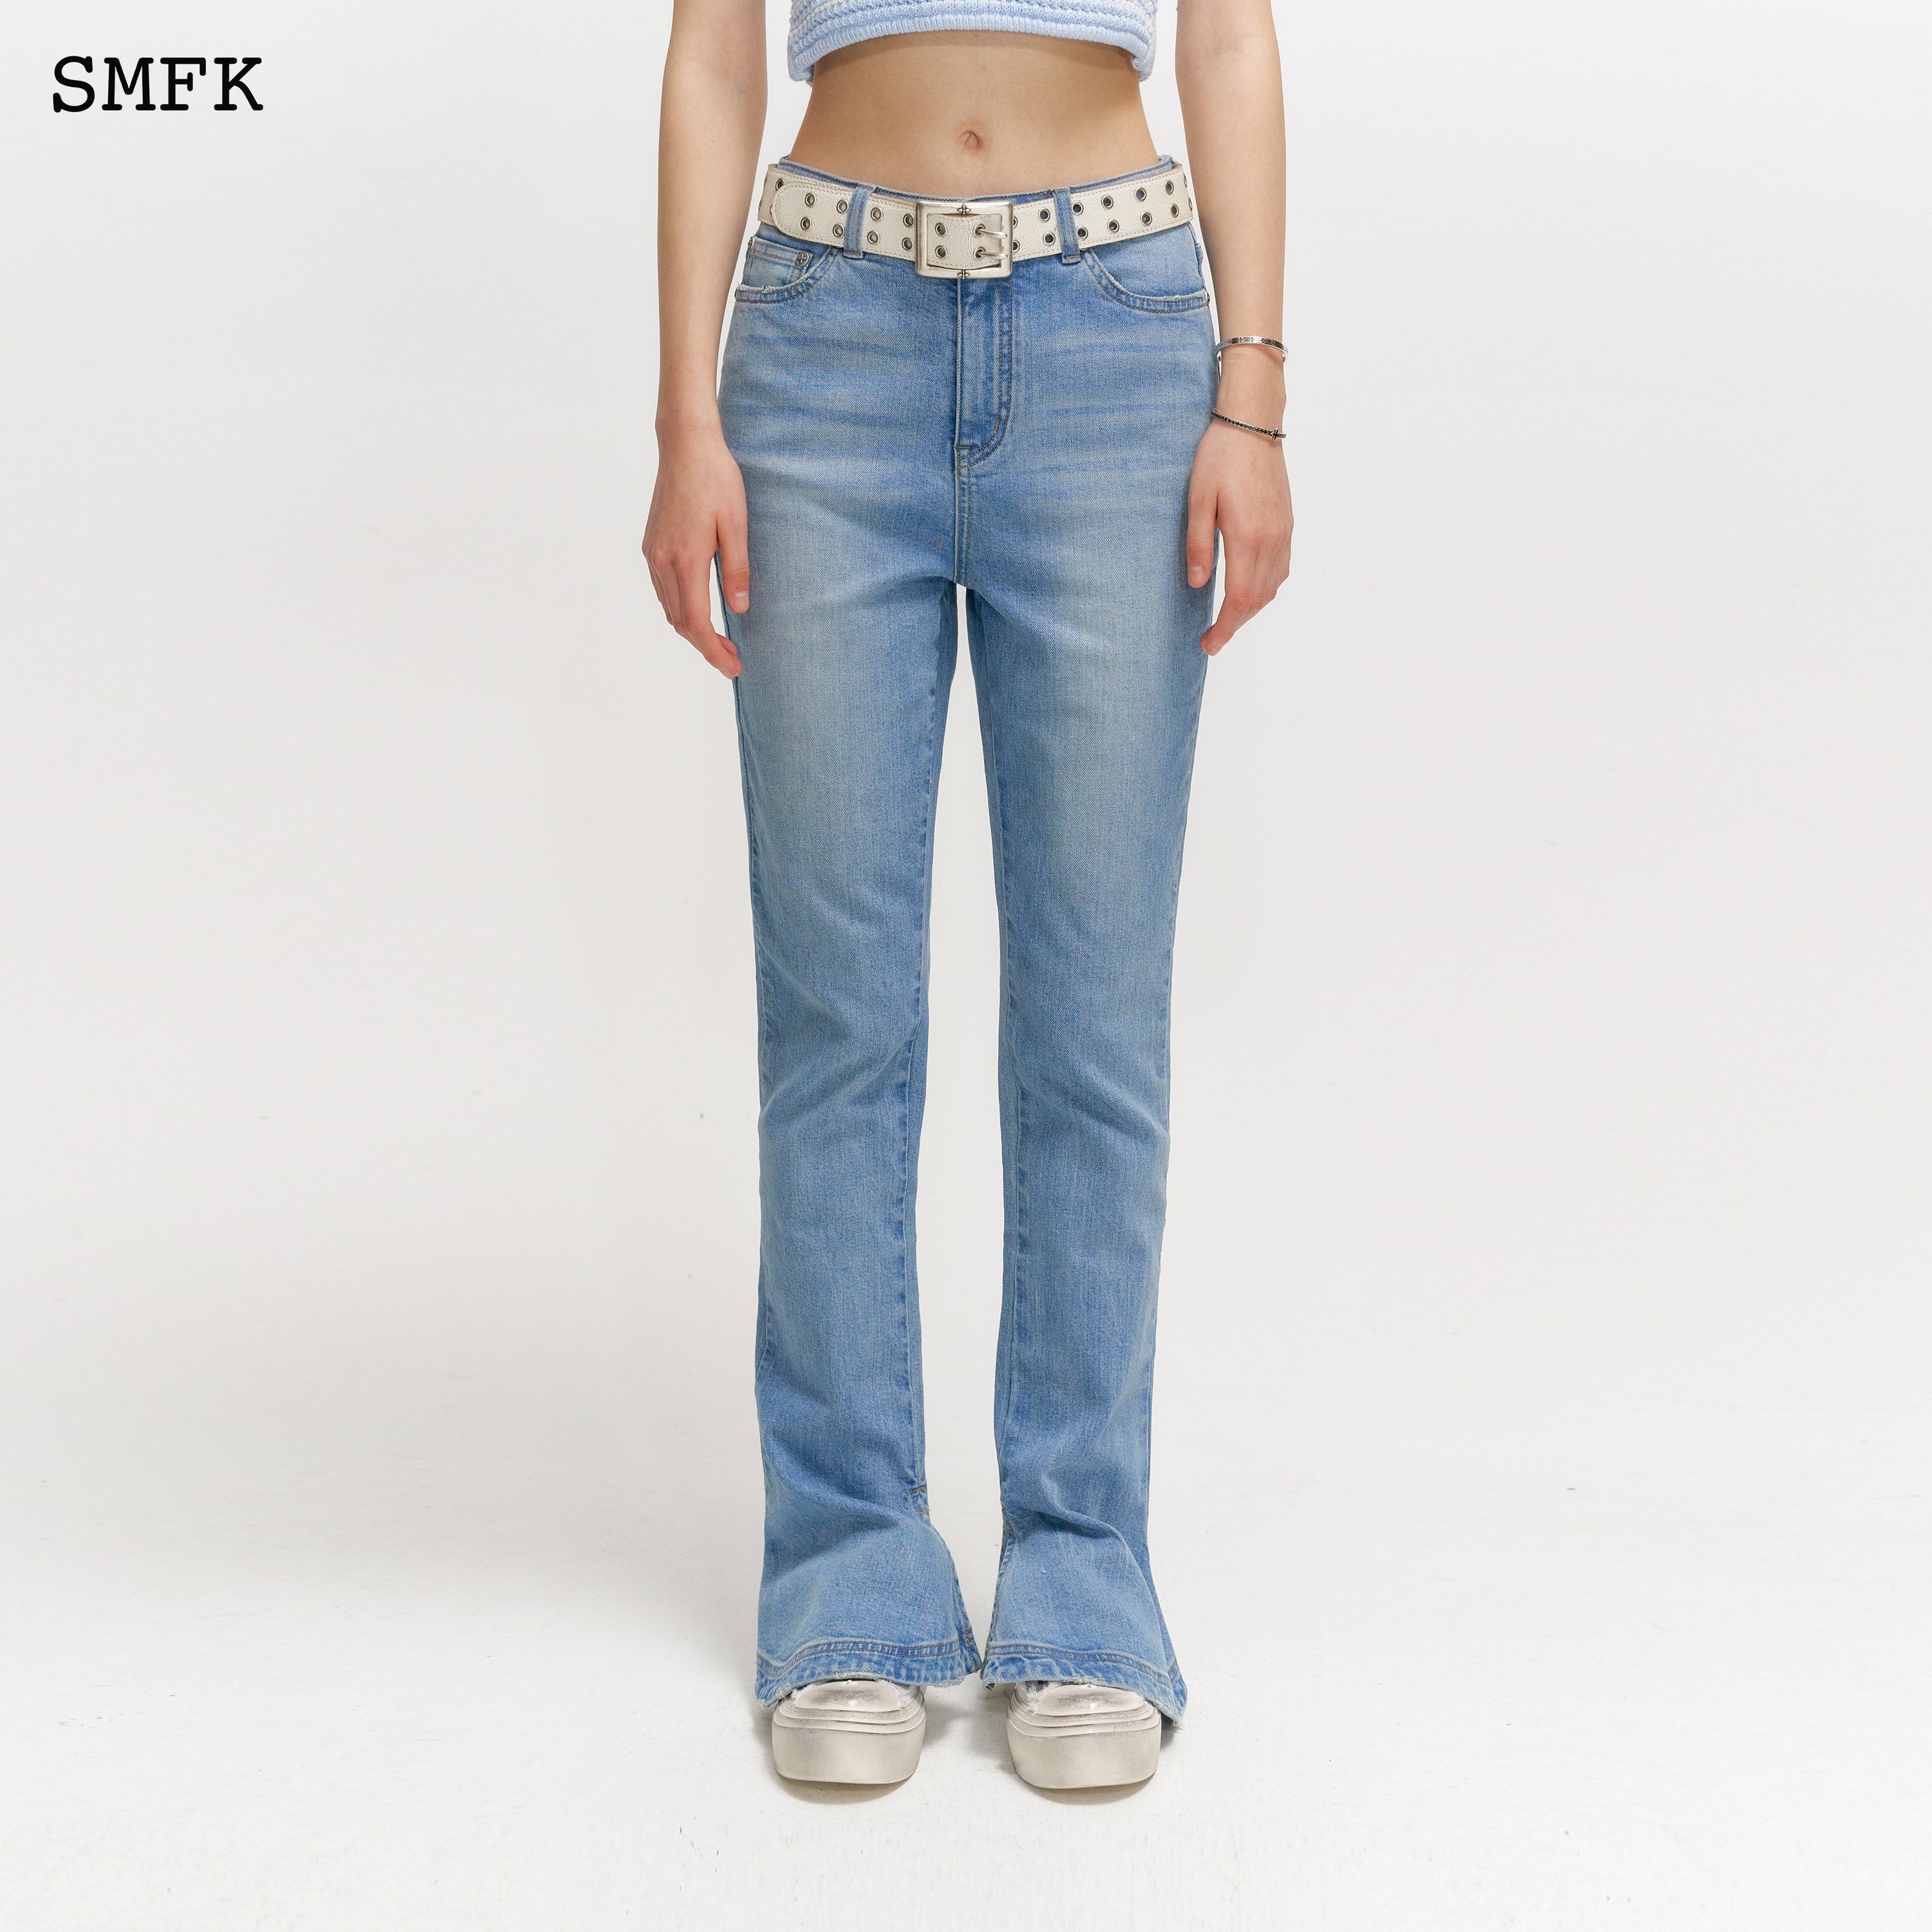 Mermaid Blue Tight Jeans - SMFK Official